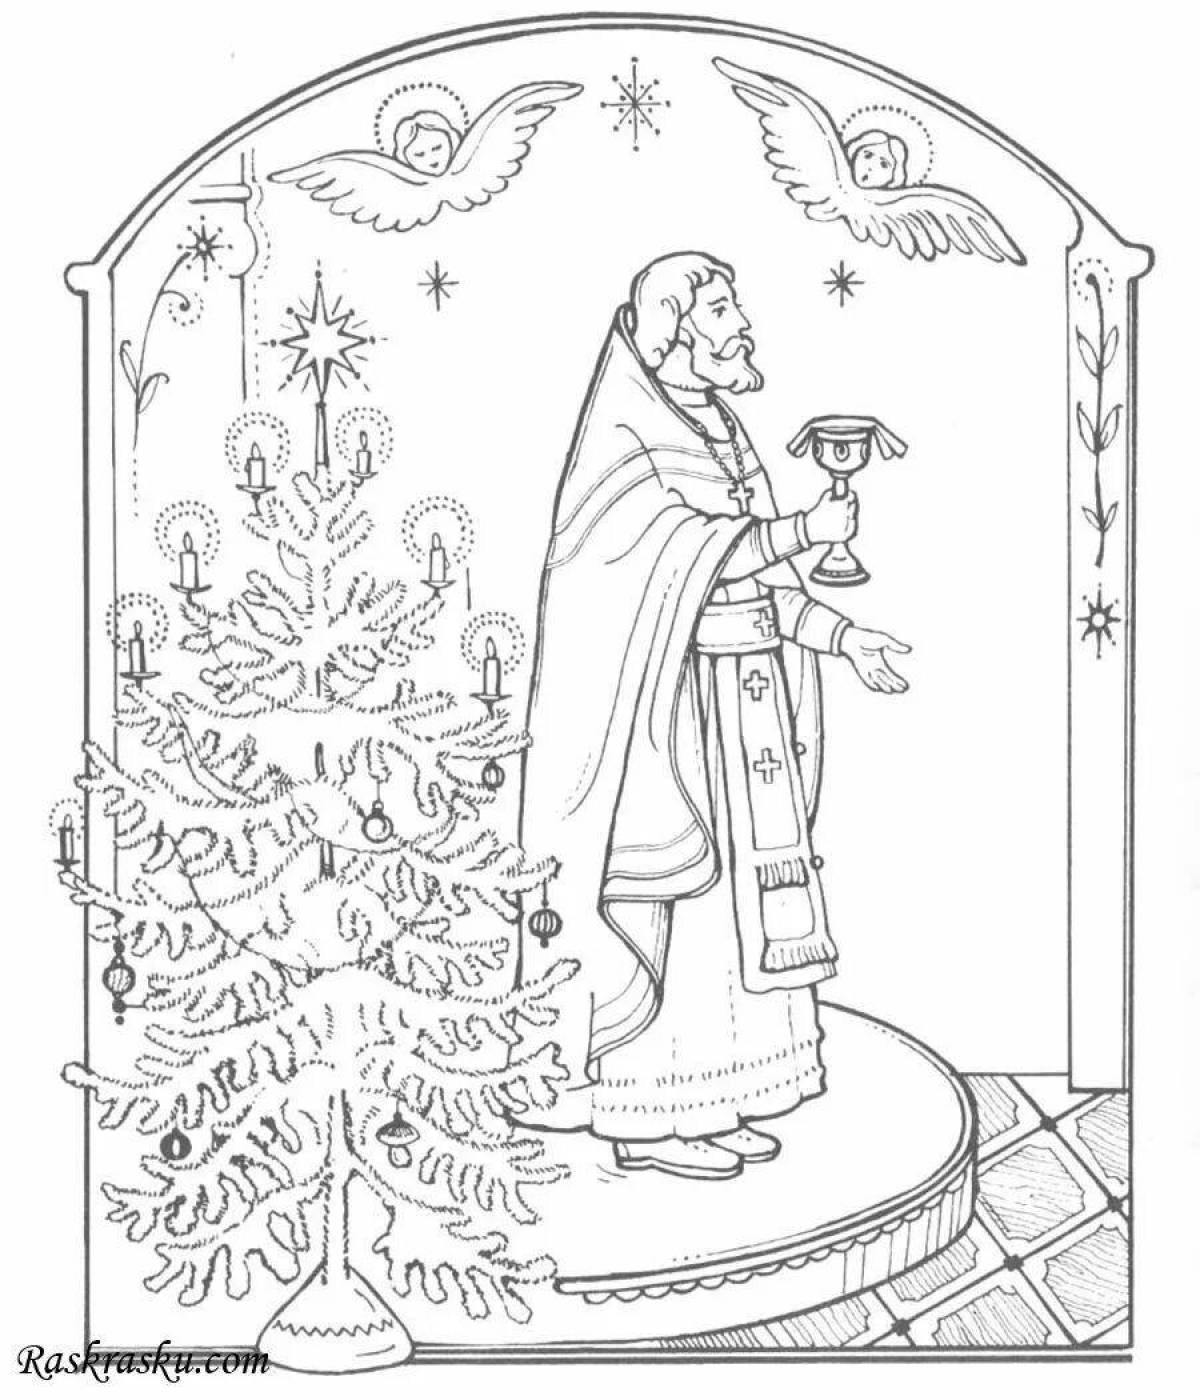 Jazzy orthodox christmas coloring book